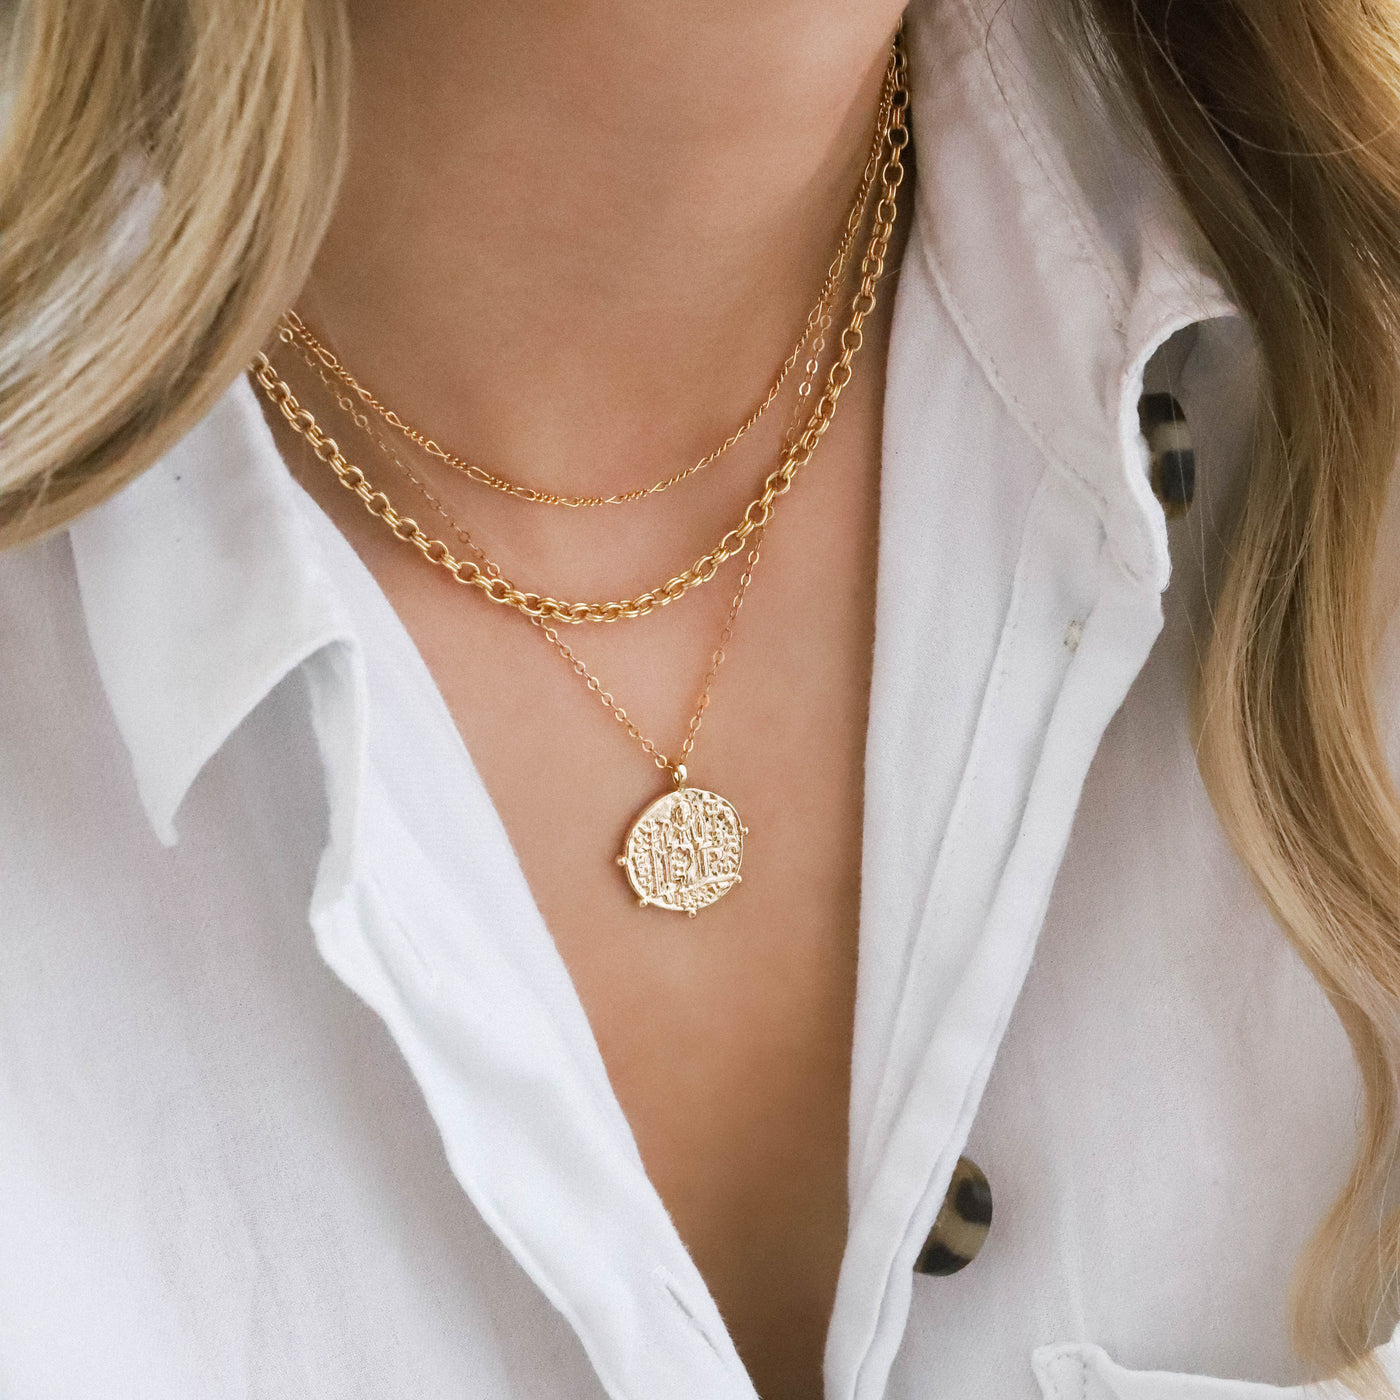 Gold filled layered necklaces